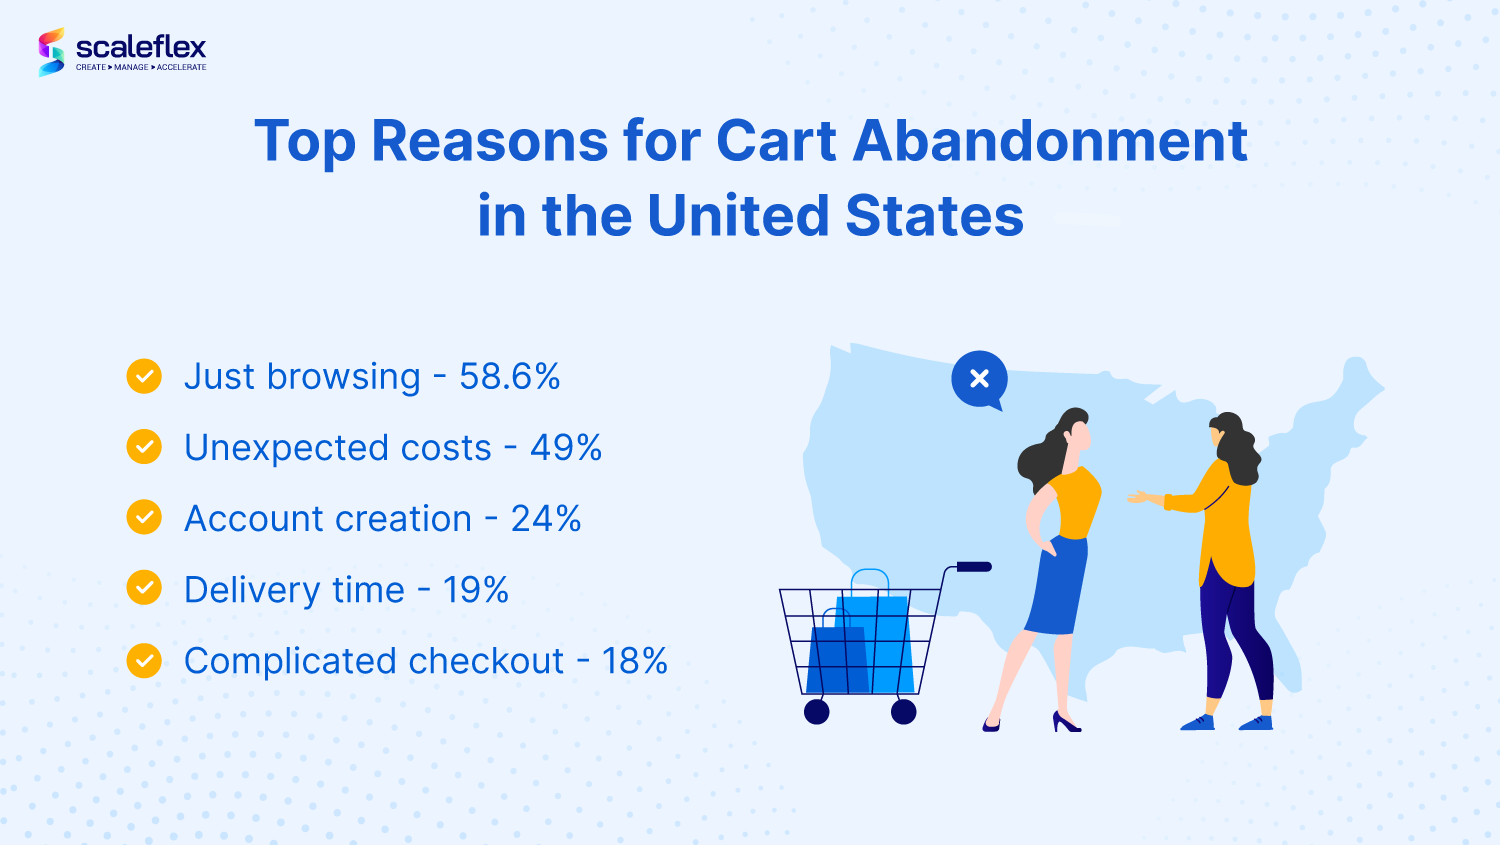 Top reasons for cart abandonment in US